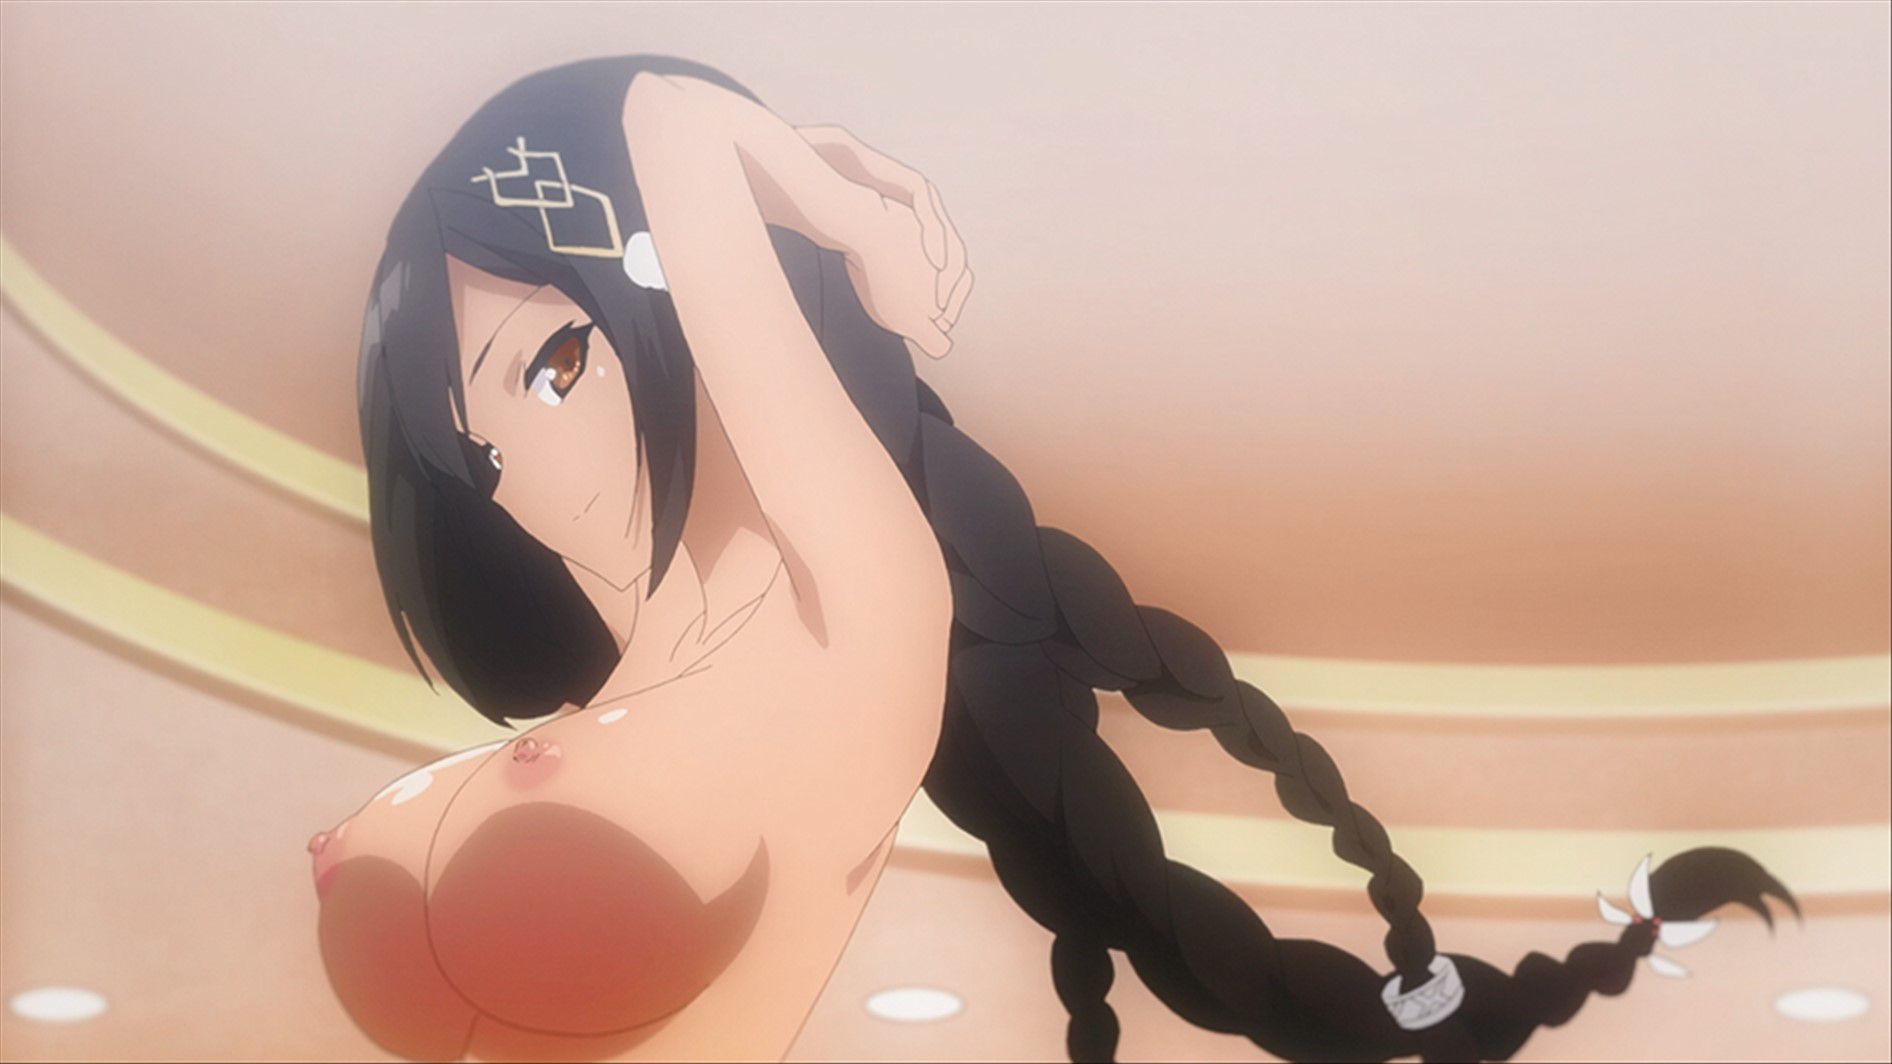 series Best with nudity anime